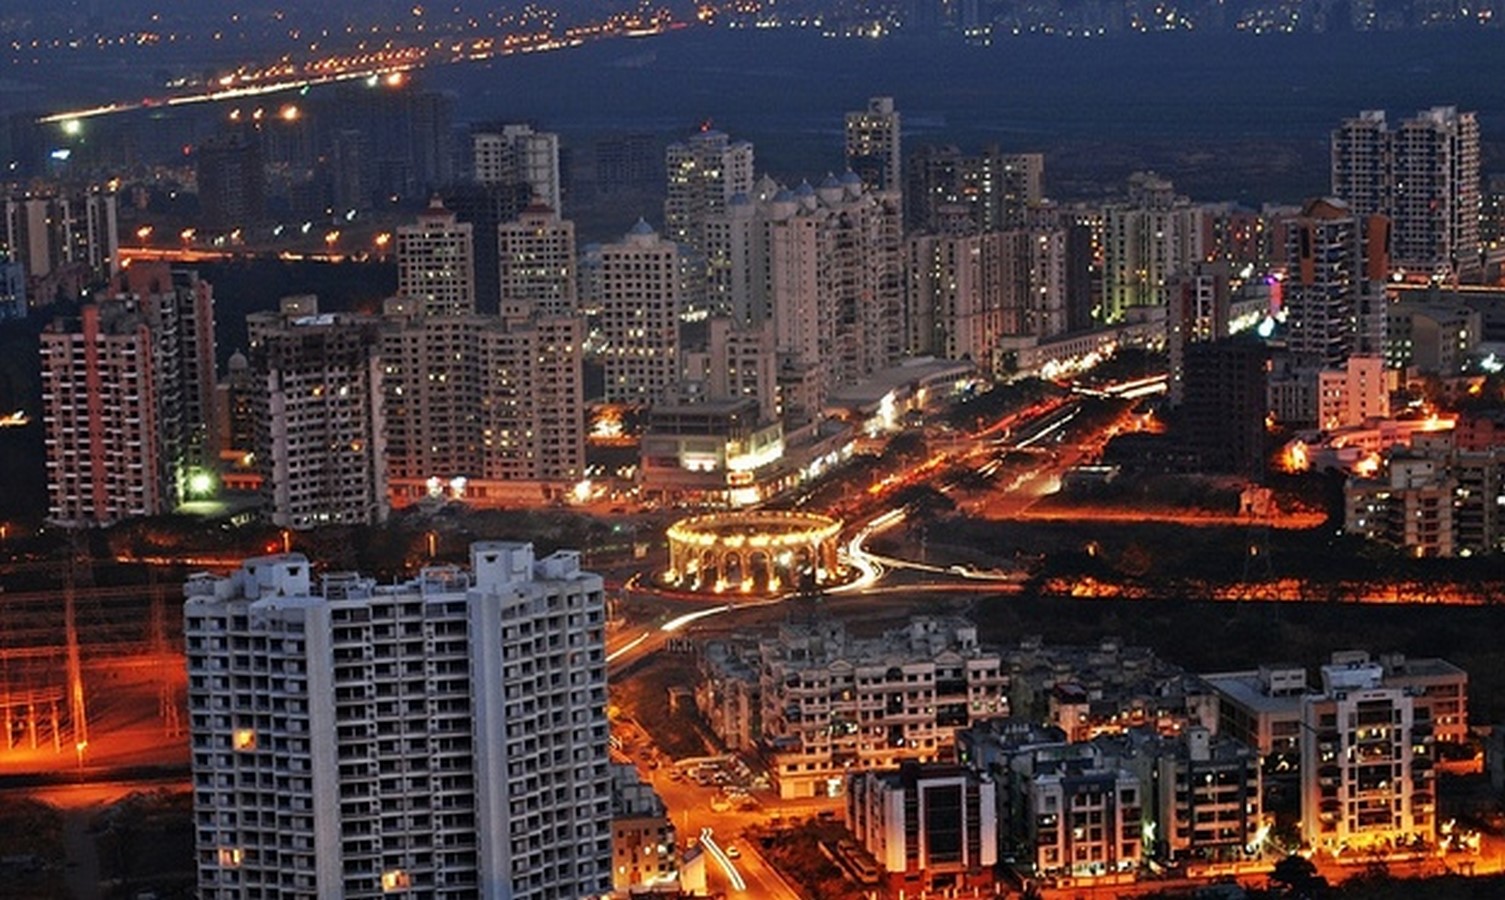 Navi Mumbai is the world's largest planned city